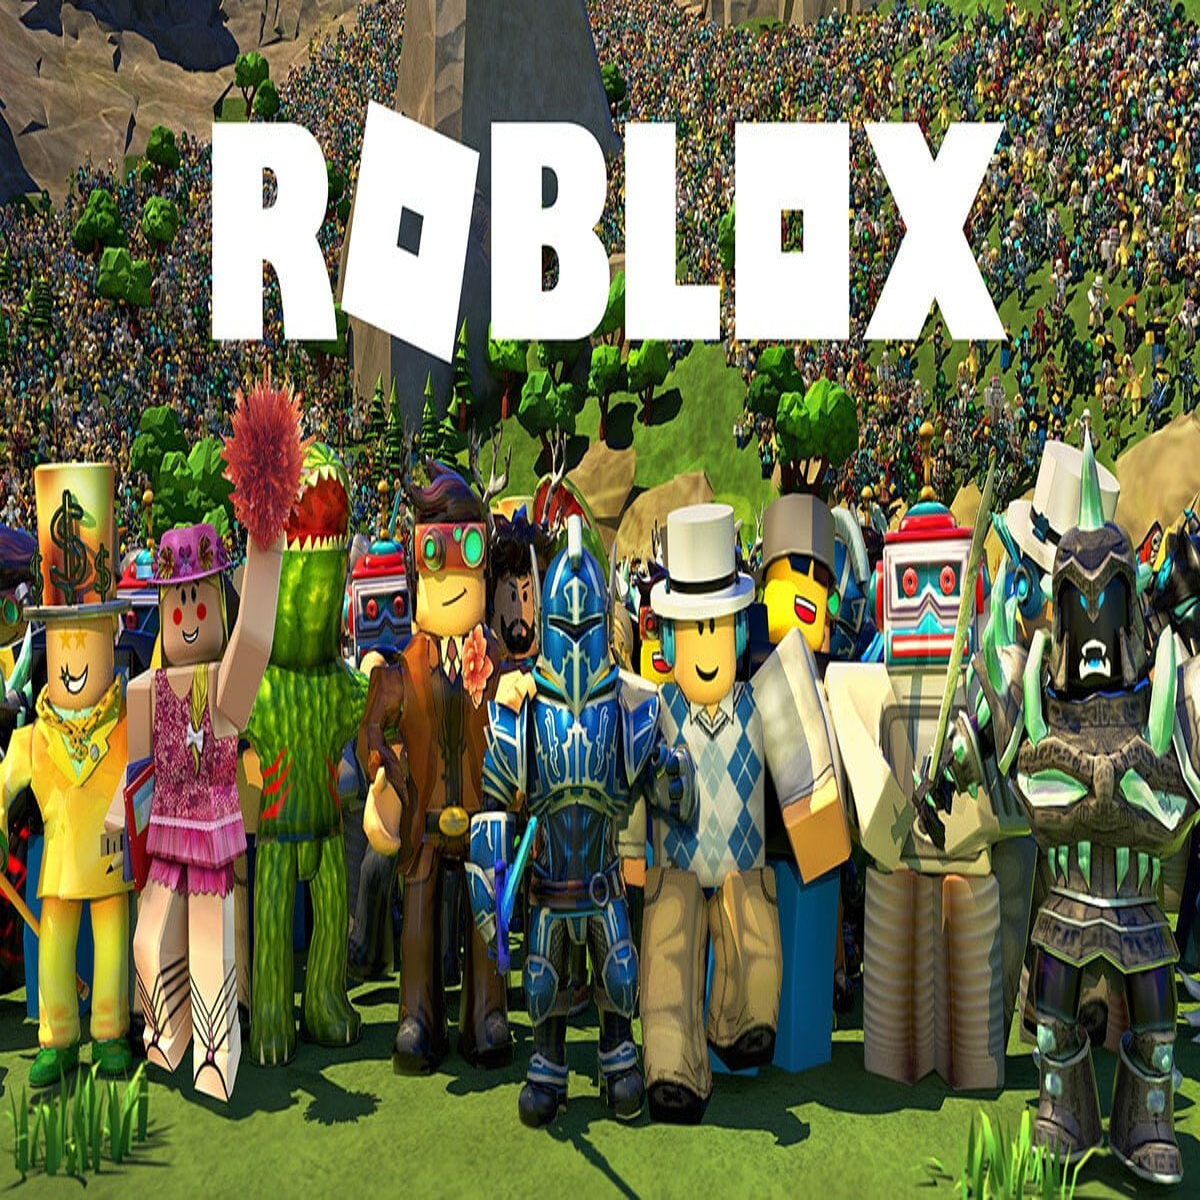 5 best Roblox games to play with friends in 2021